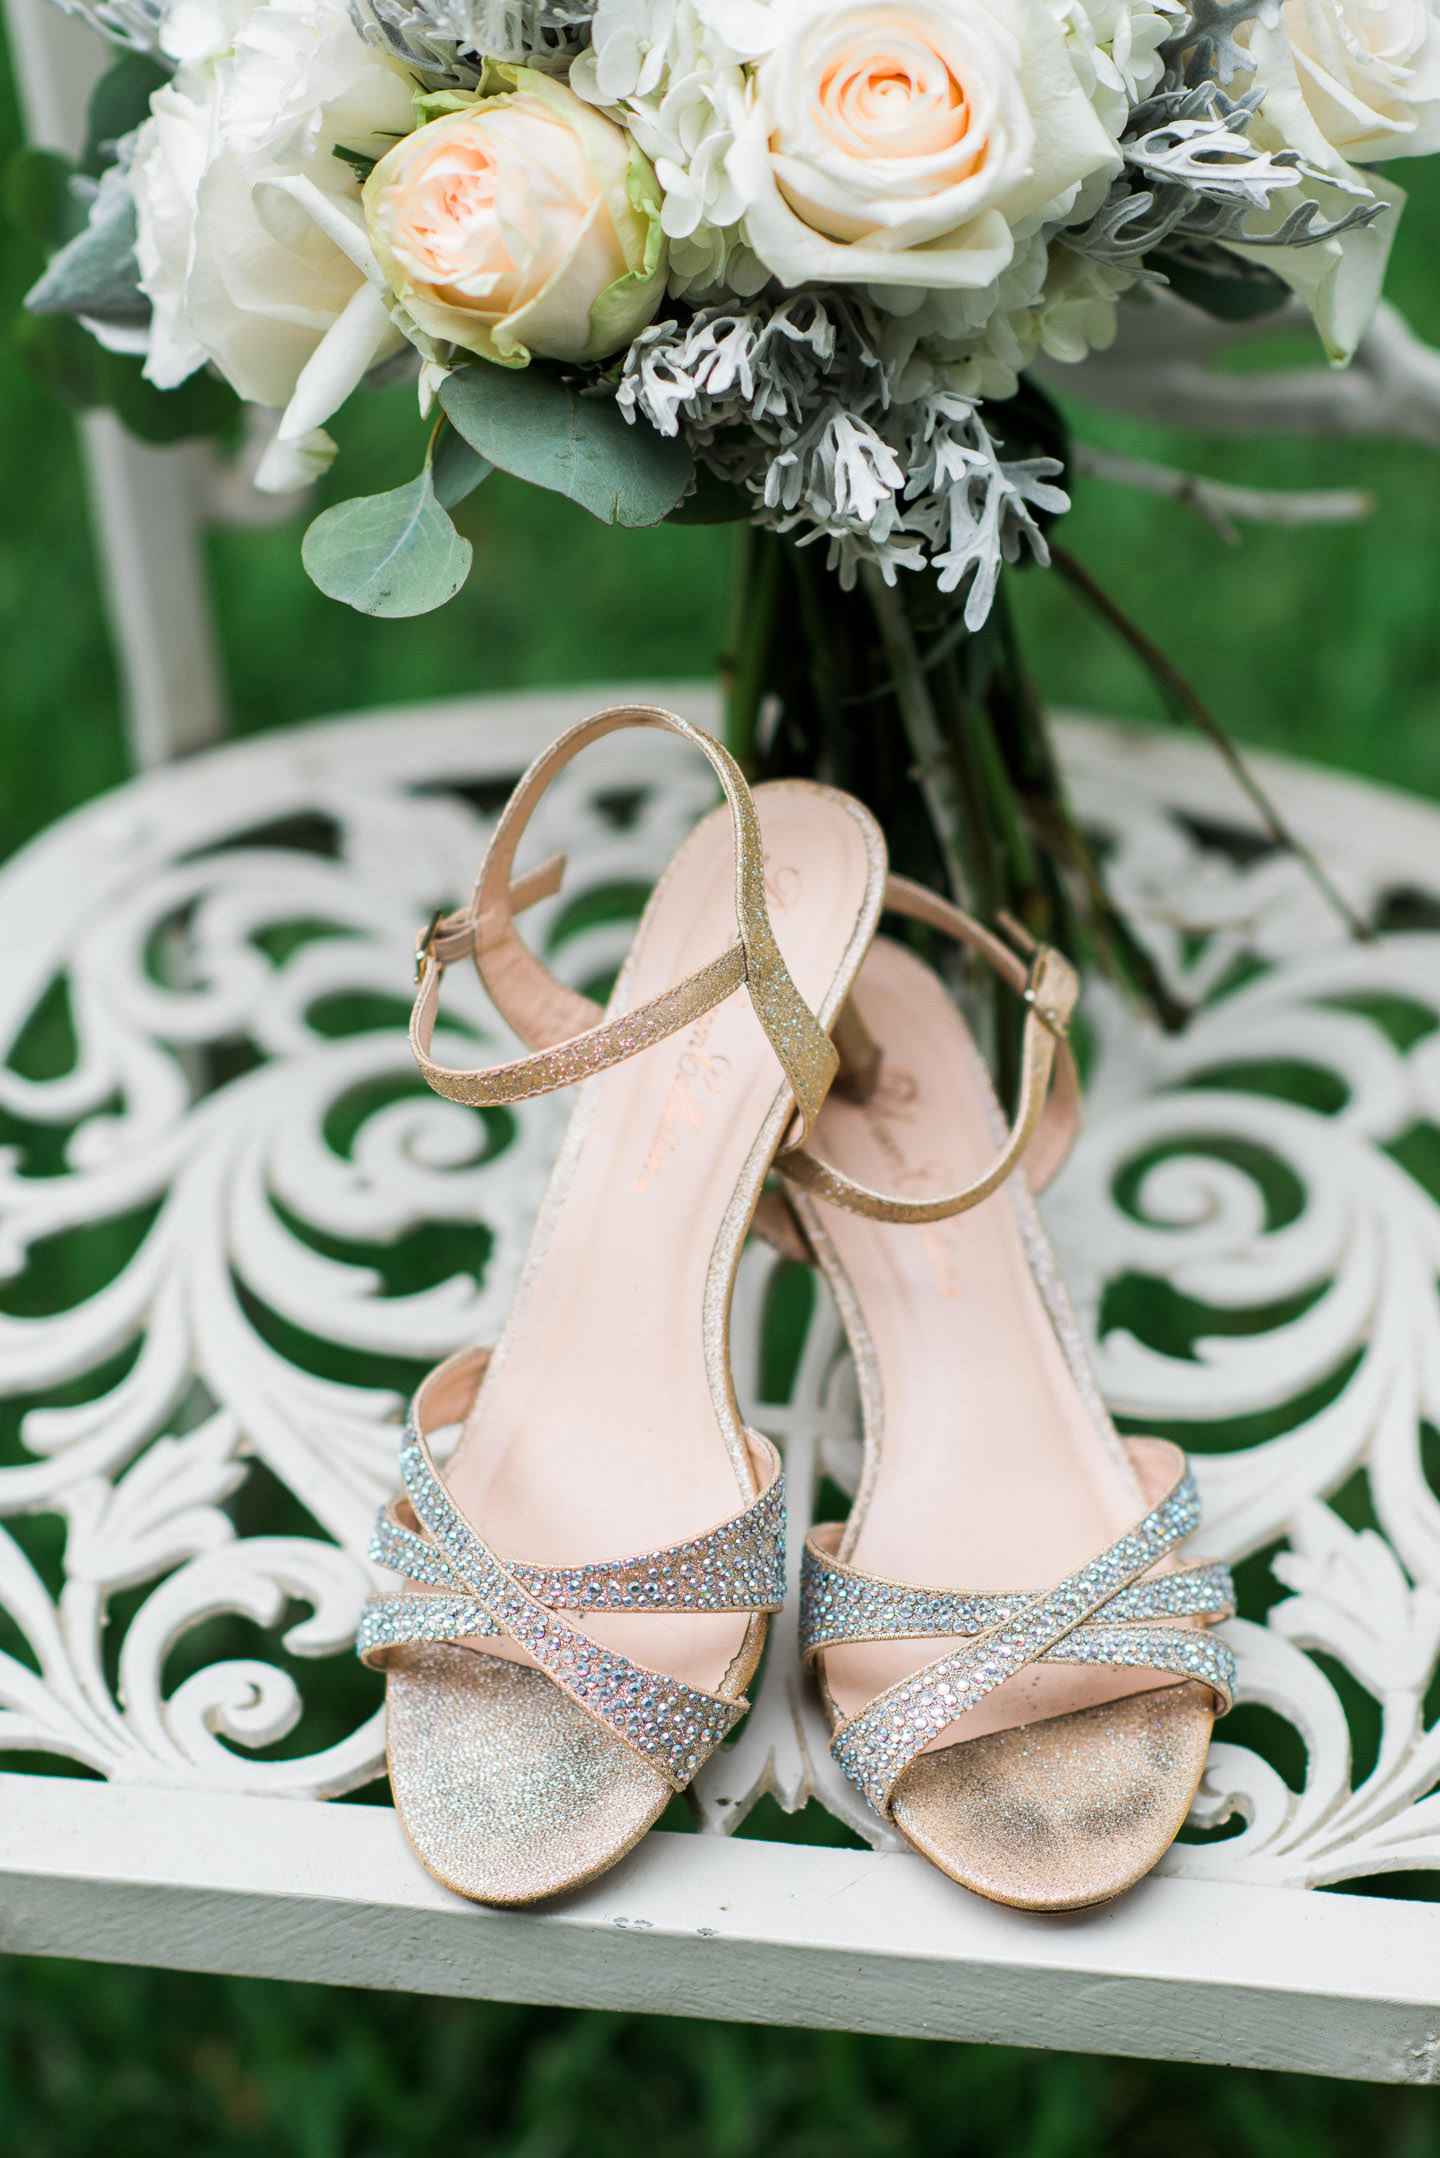 Bride's shoes and bouquet on white wrought iron chair photographed by Ashley Schurch Photography